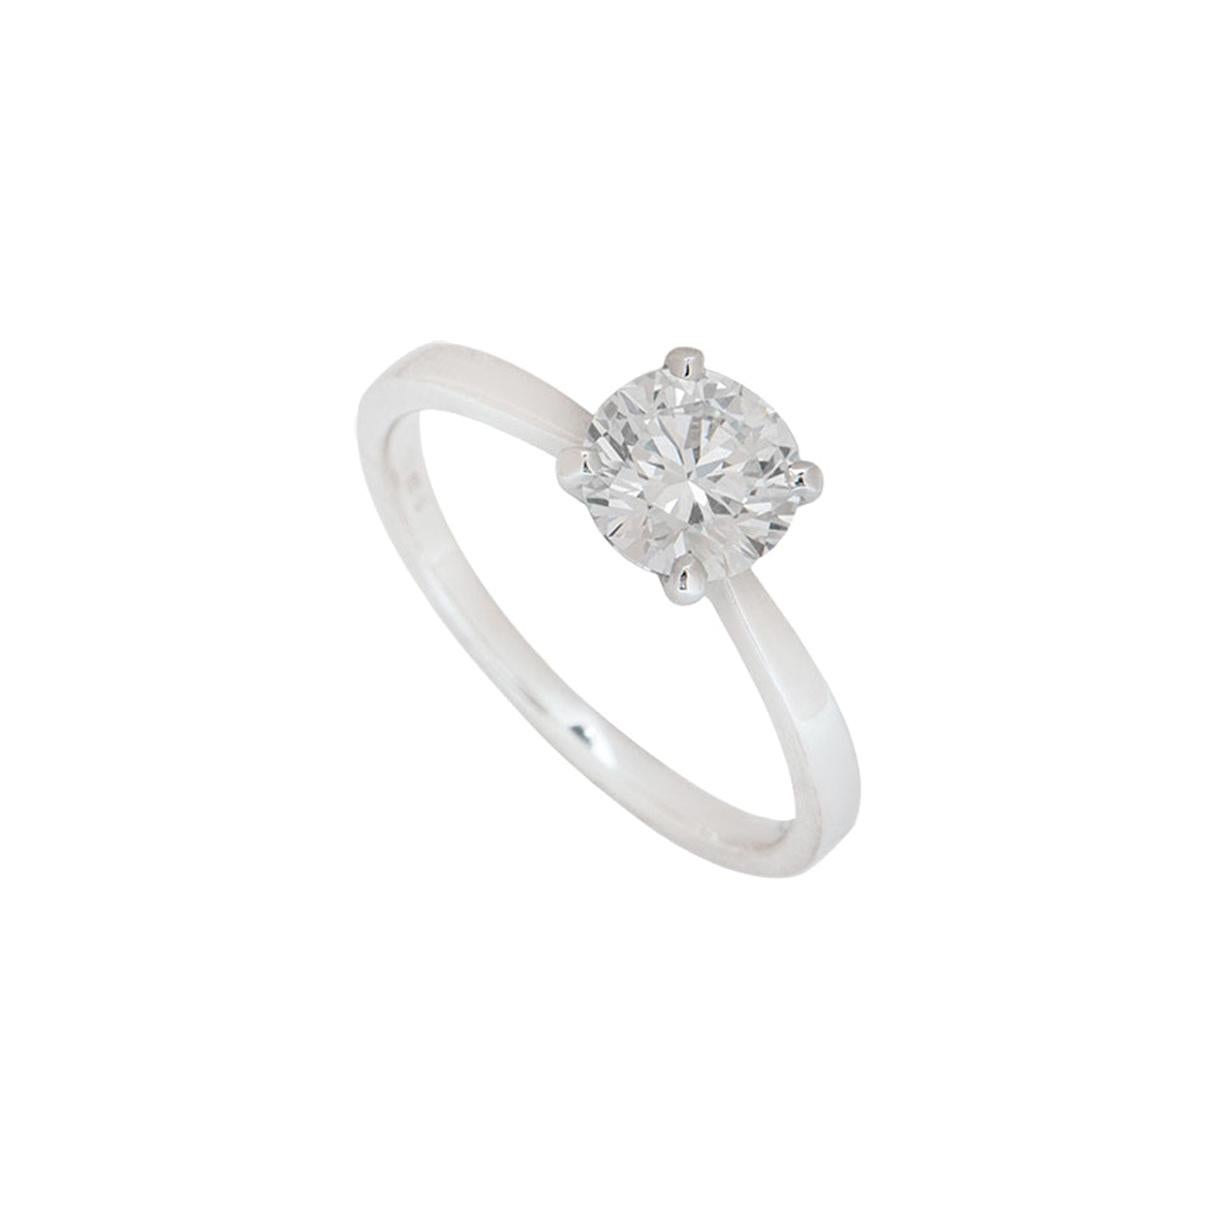 GIA Certified Round Brilliant Cut Diamond Solitaire Engagement Ring 1.04 Carat